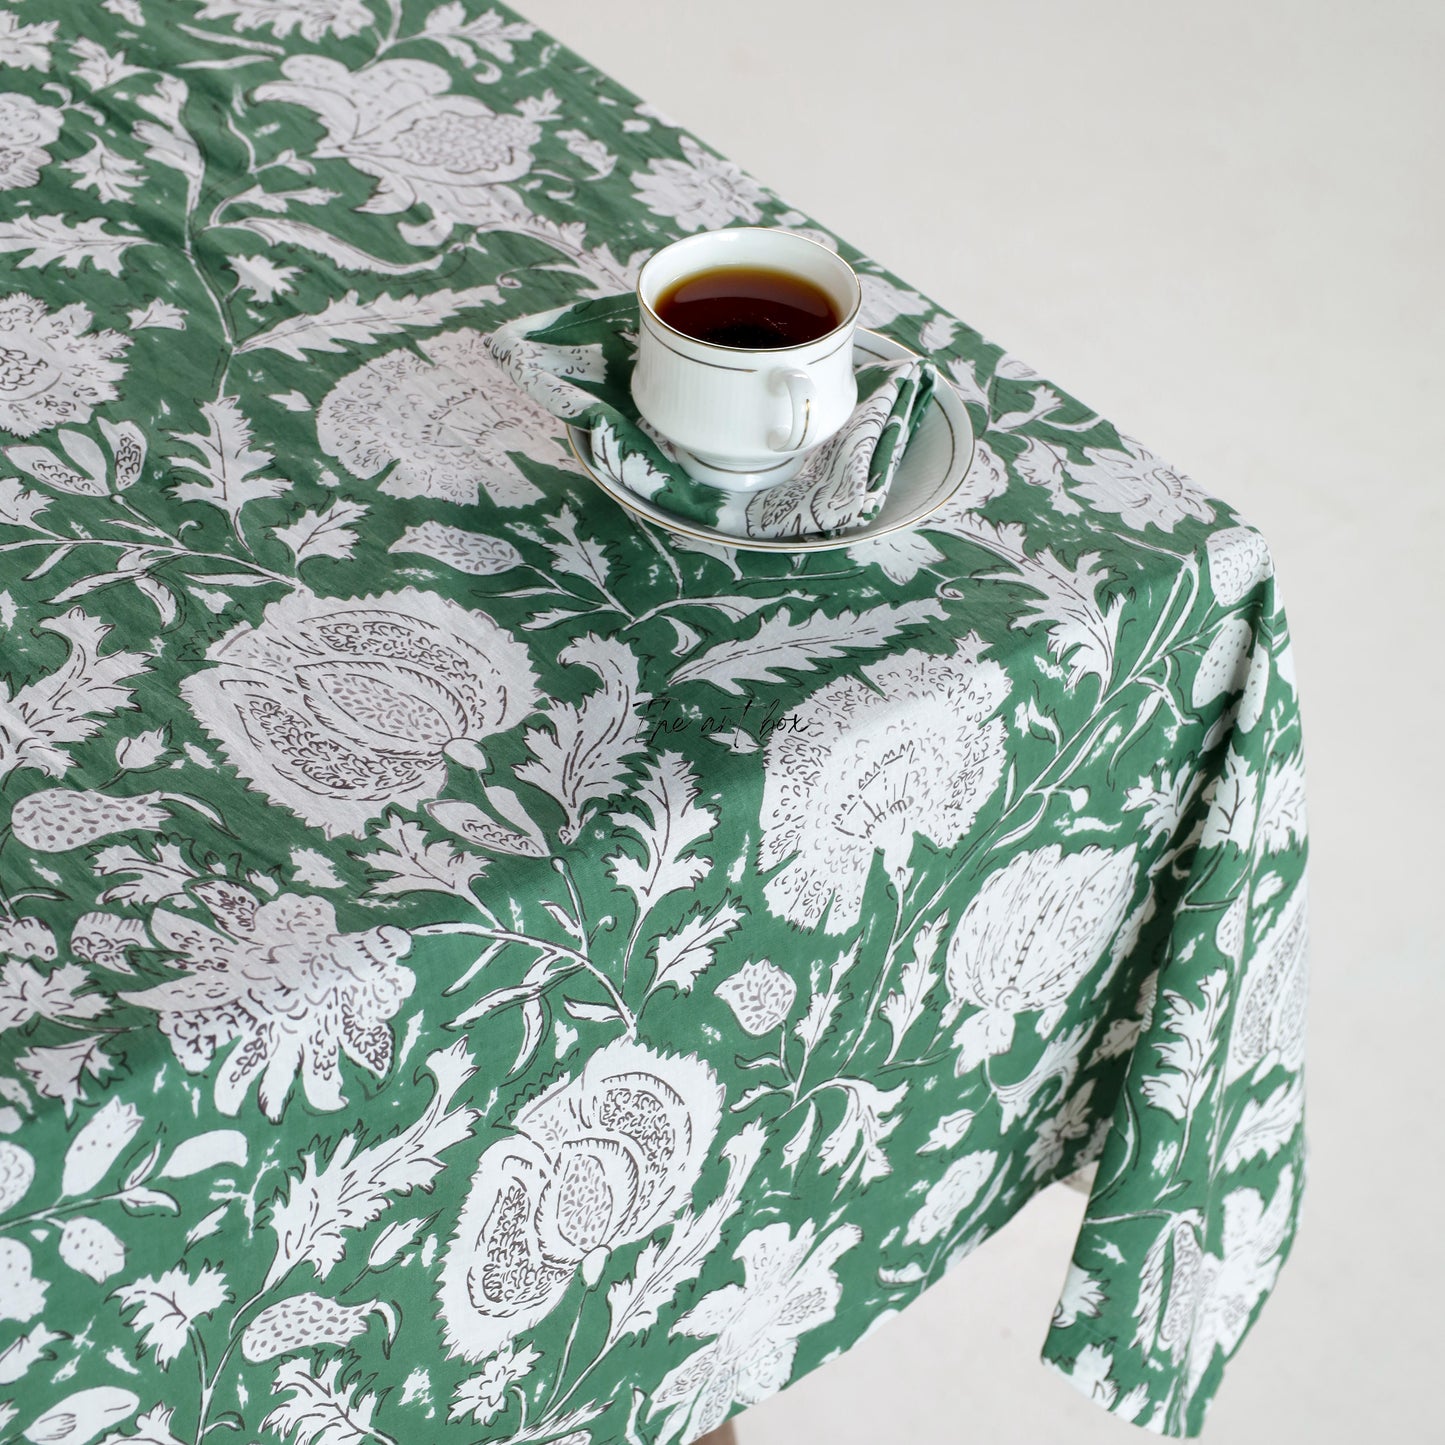 Indian Print Table Cloth, Green Floral Printed Cotton Table Cover